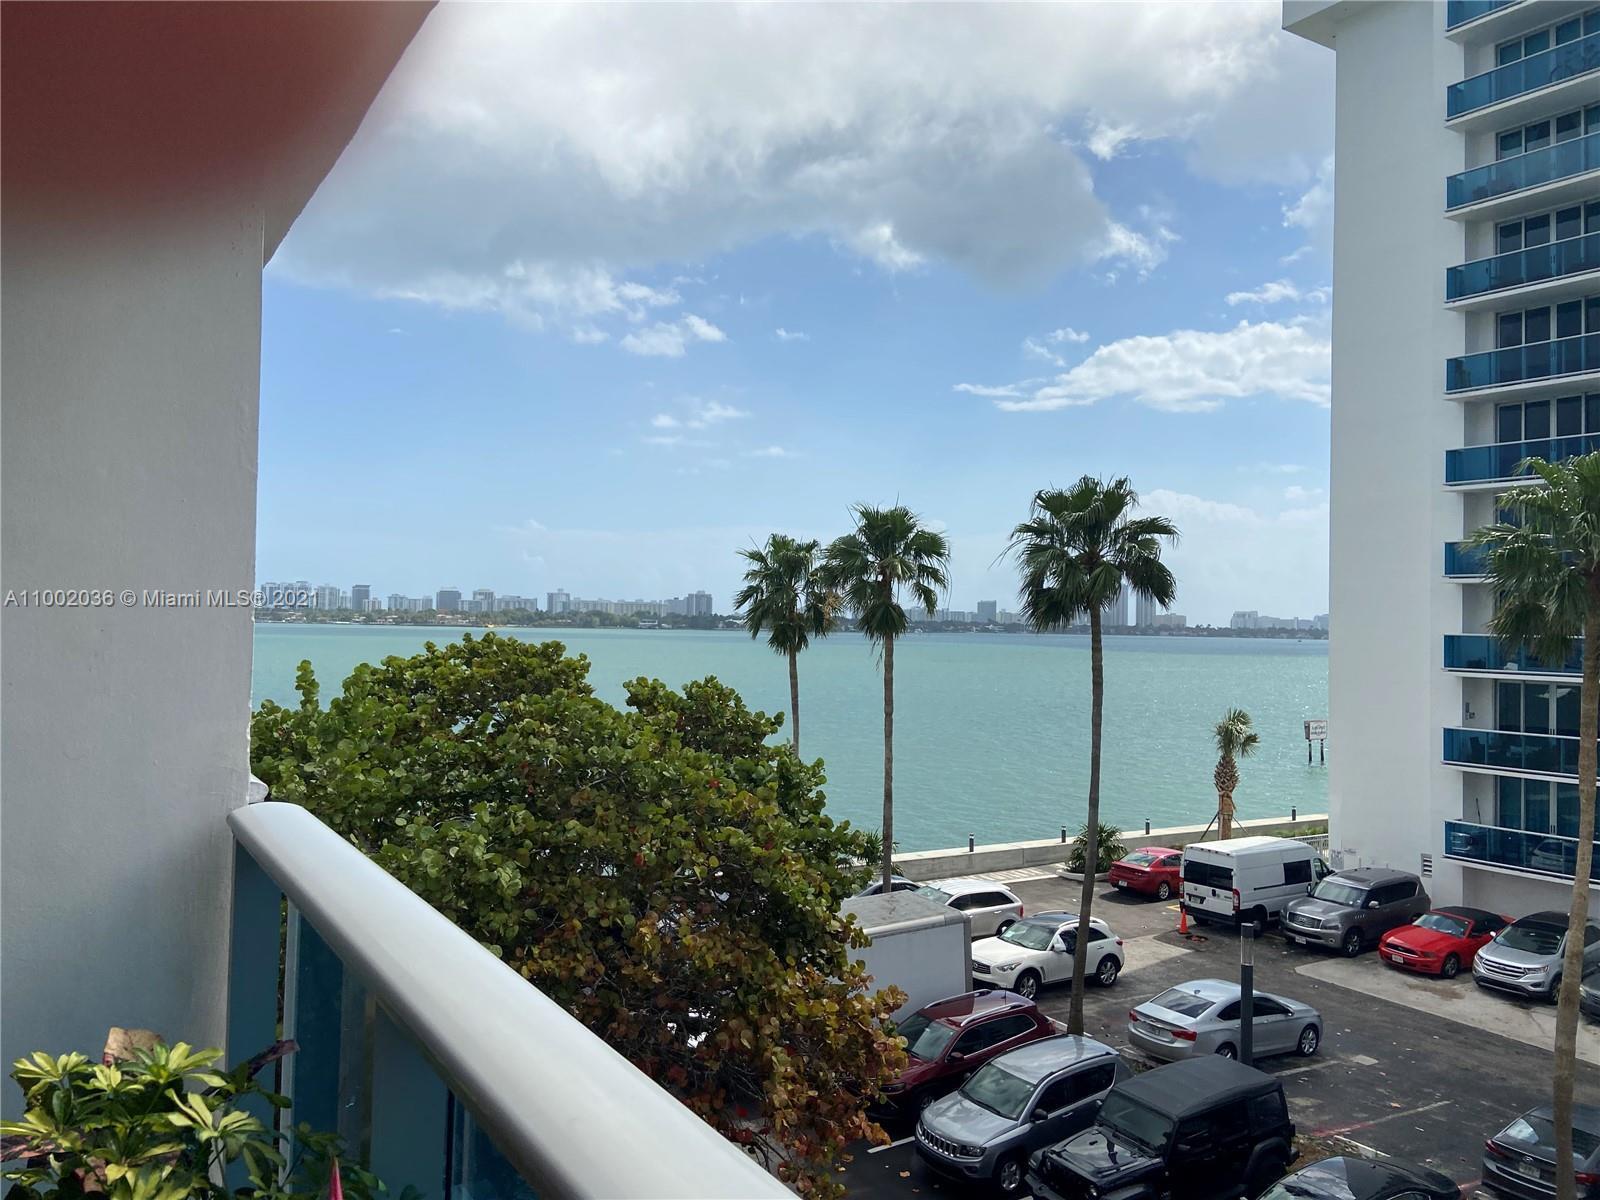 RECENTLY  REMODELED BUILDING.GLASS BALCONY,LOCATION!!  SPACIOUS  1 BED 1 BATH IN NOTH BAY VILLAGE. I